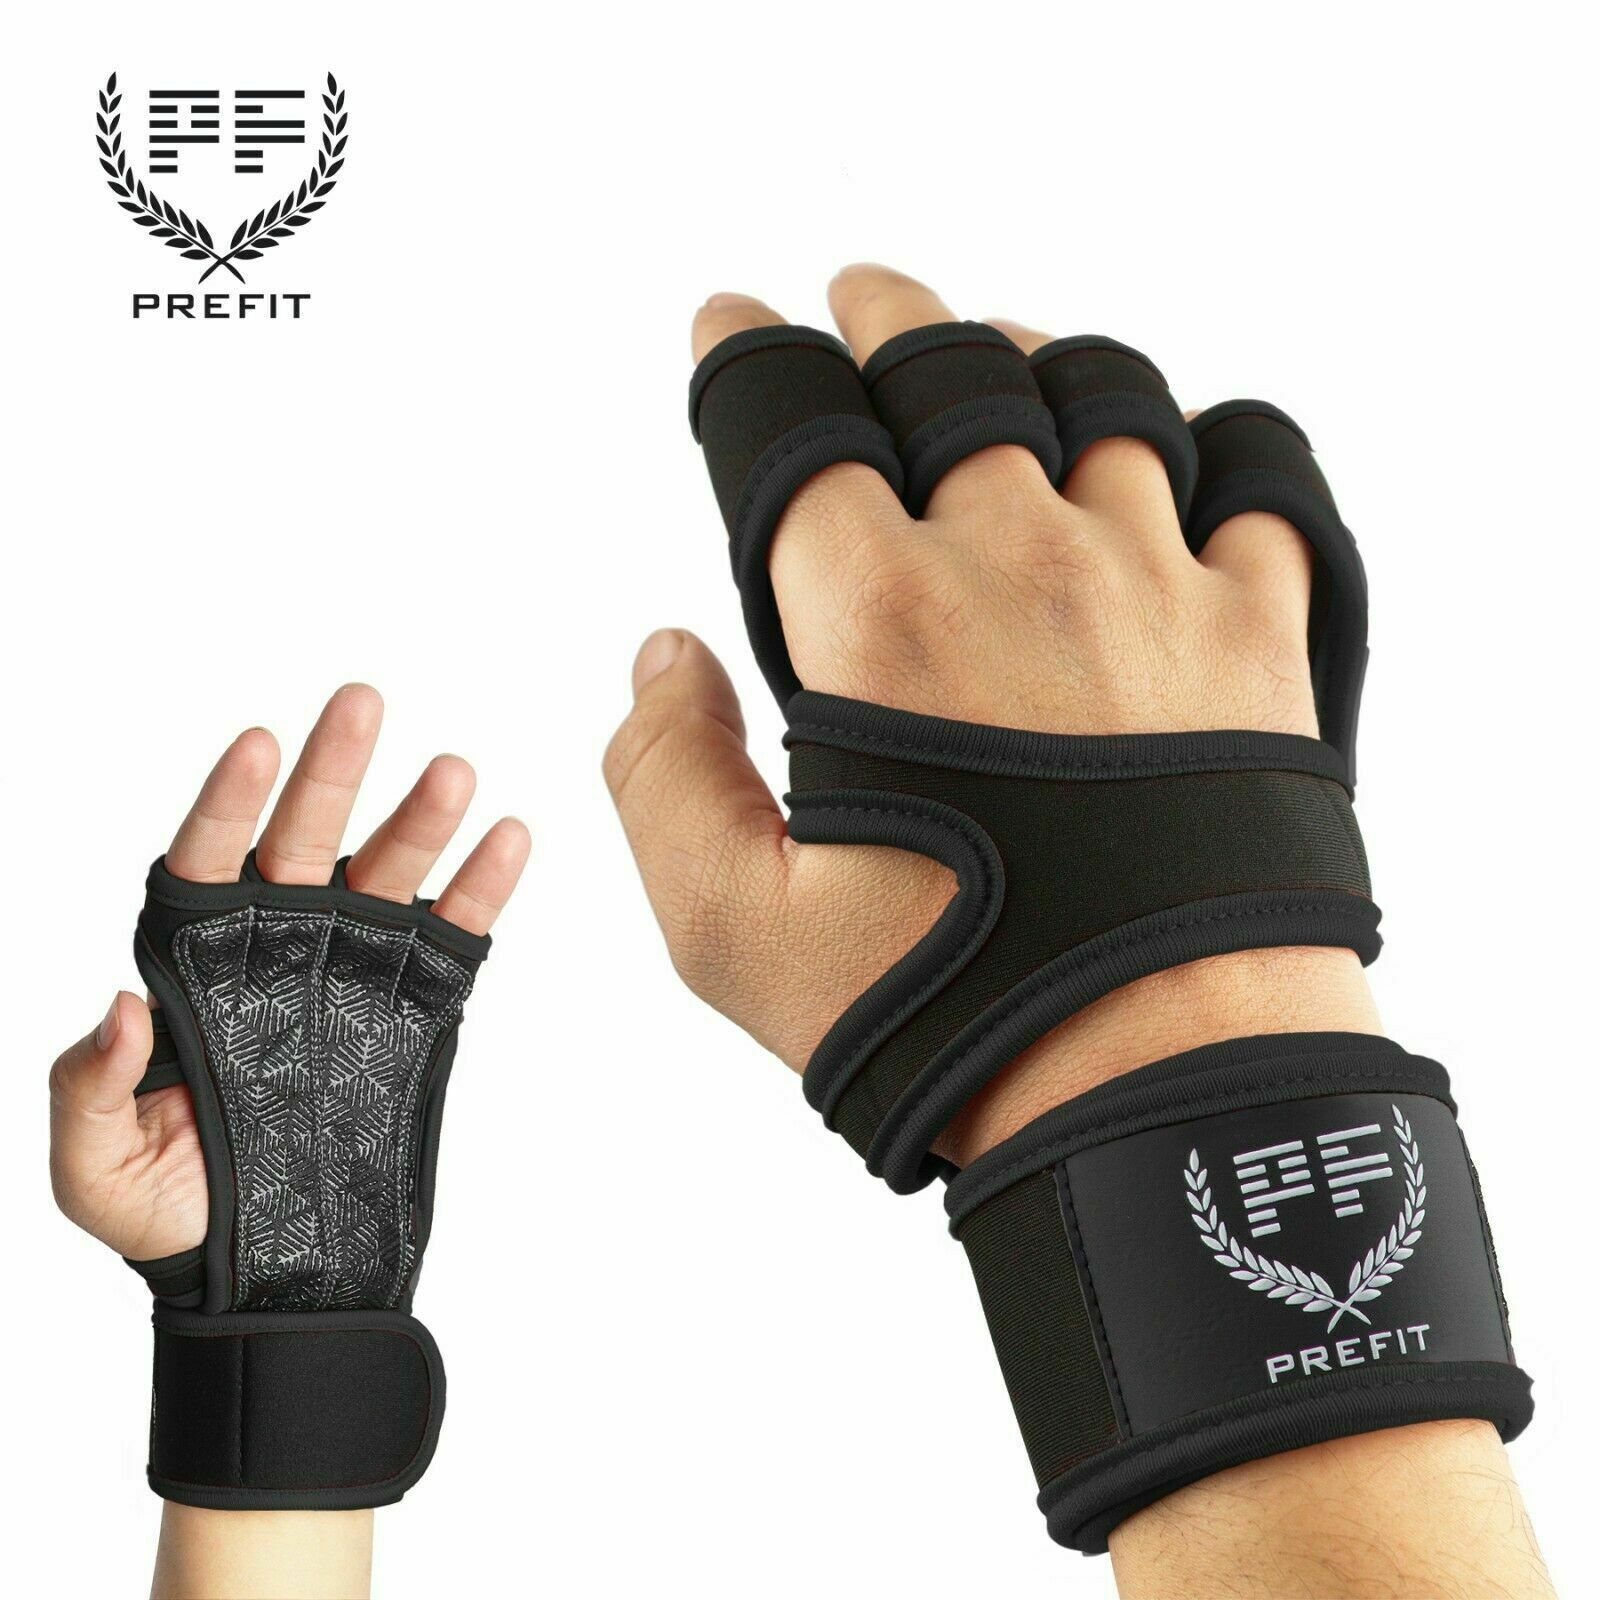 Prefit Fitness Gloves Weight Lifting Gym Workout Training Wrist Wrap Strap